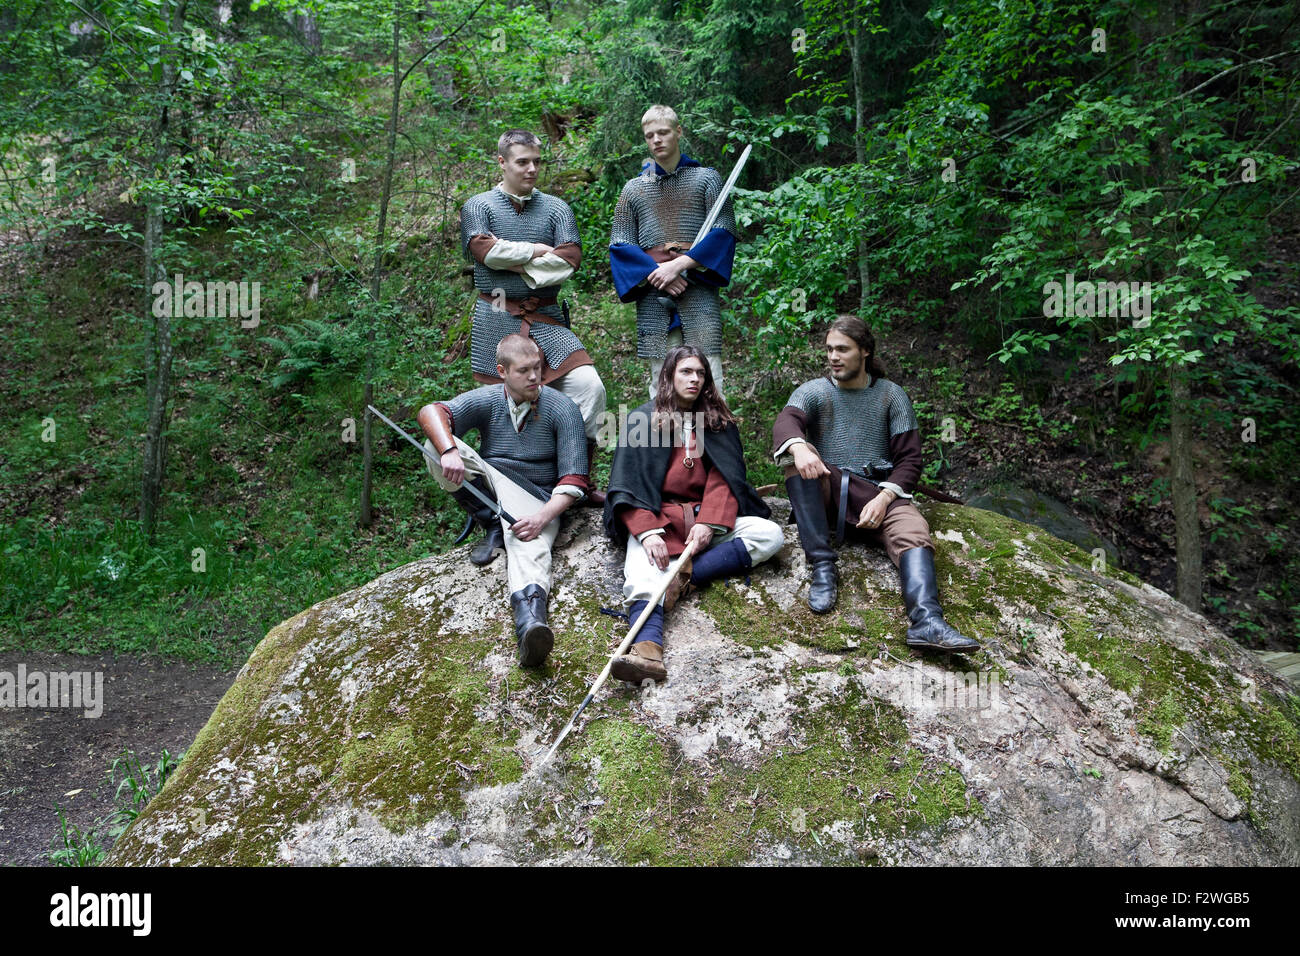 Members of the Folklore and Ancient Fight group Vilkaci sitting on rock Stock Photo